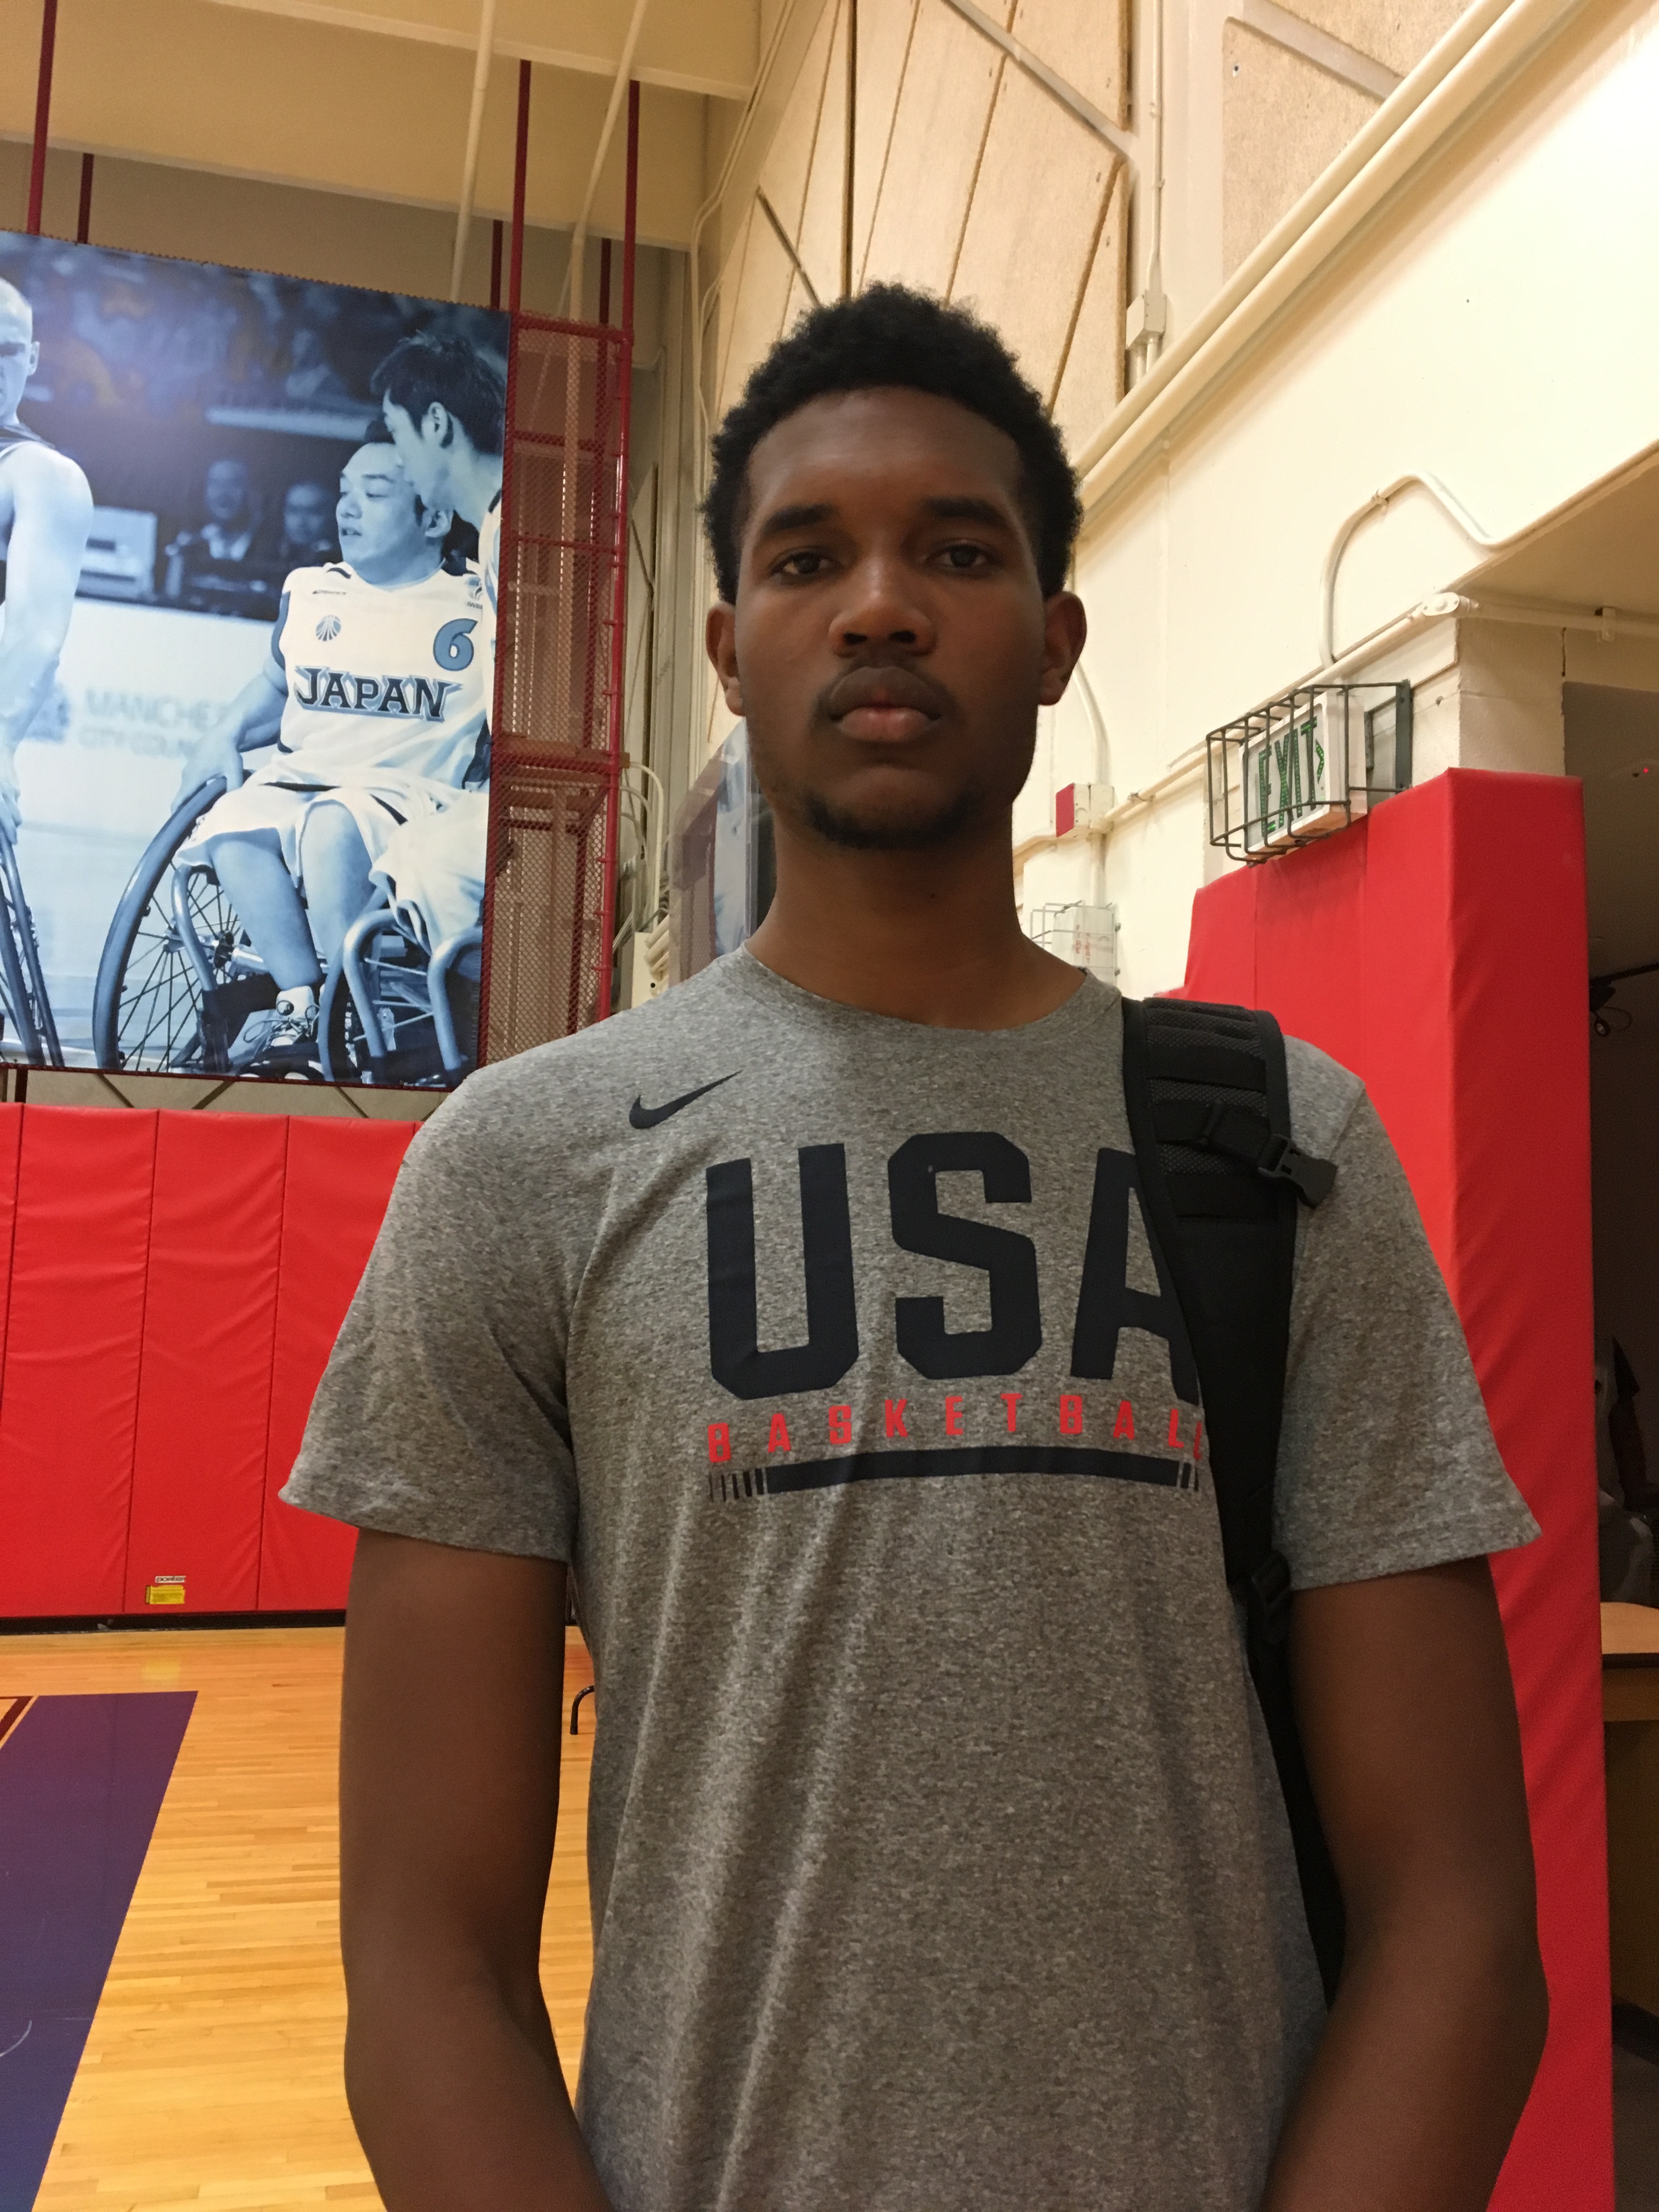 Evan Mobley scouting: USC commit & No. 1 prospect in 2020 class shows  excellent passing but needs to add weight 